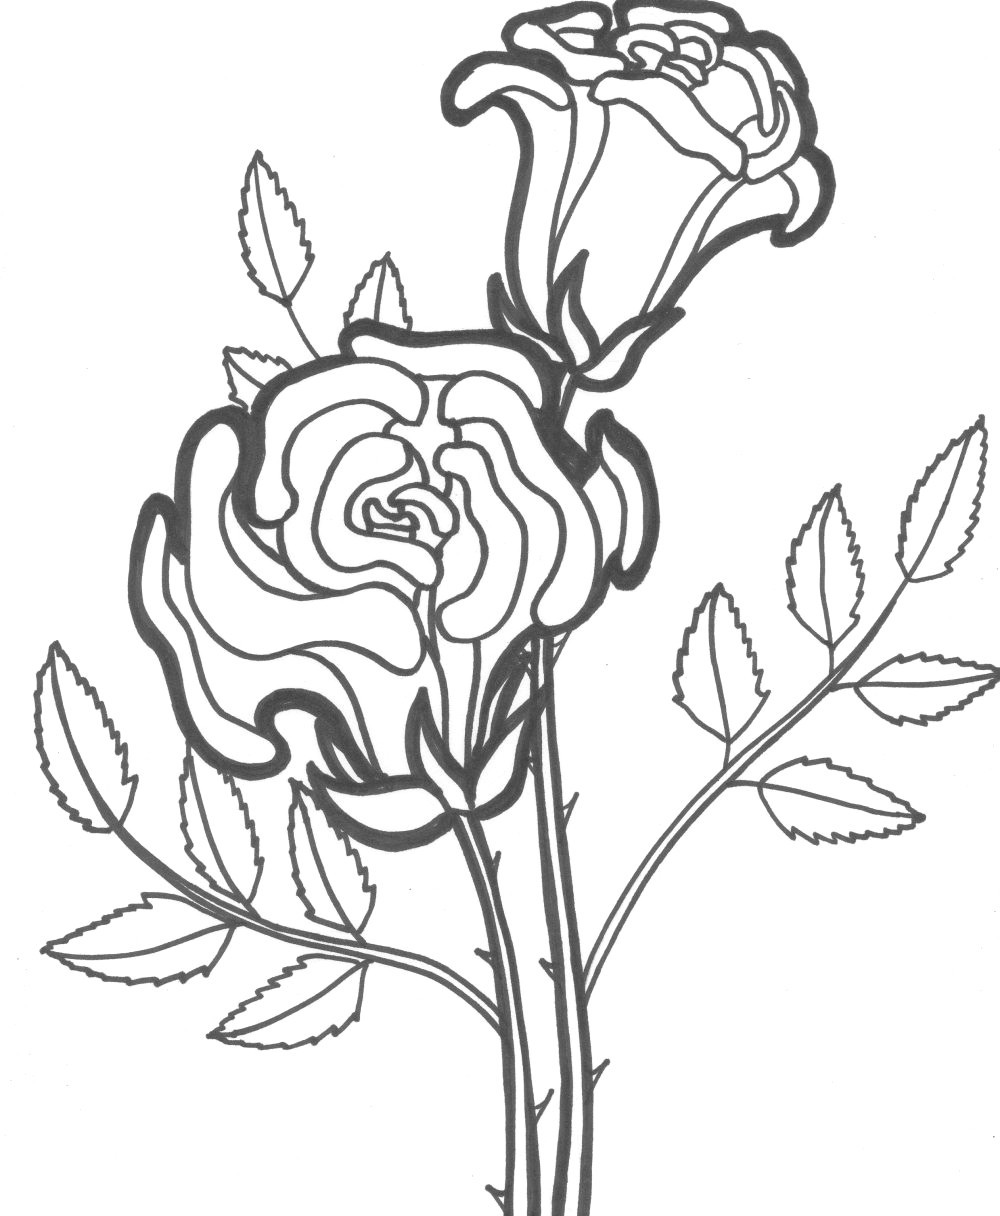 17 Lovely Star Wars Flower Vase 2024 free download star wars flower vase of coloring pages of roses vases flower vase coloring page pages pertaining to coloring pages of roses high quality image coloring pages roses and flowers with new